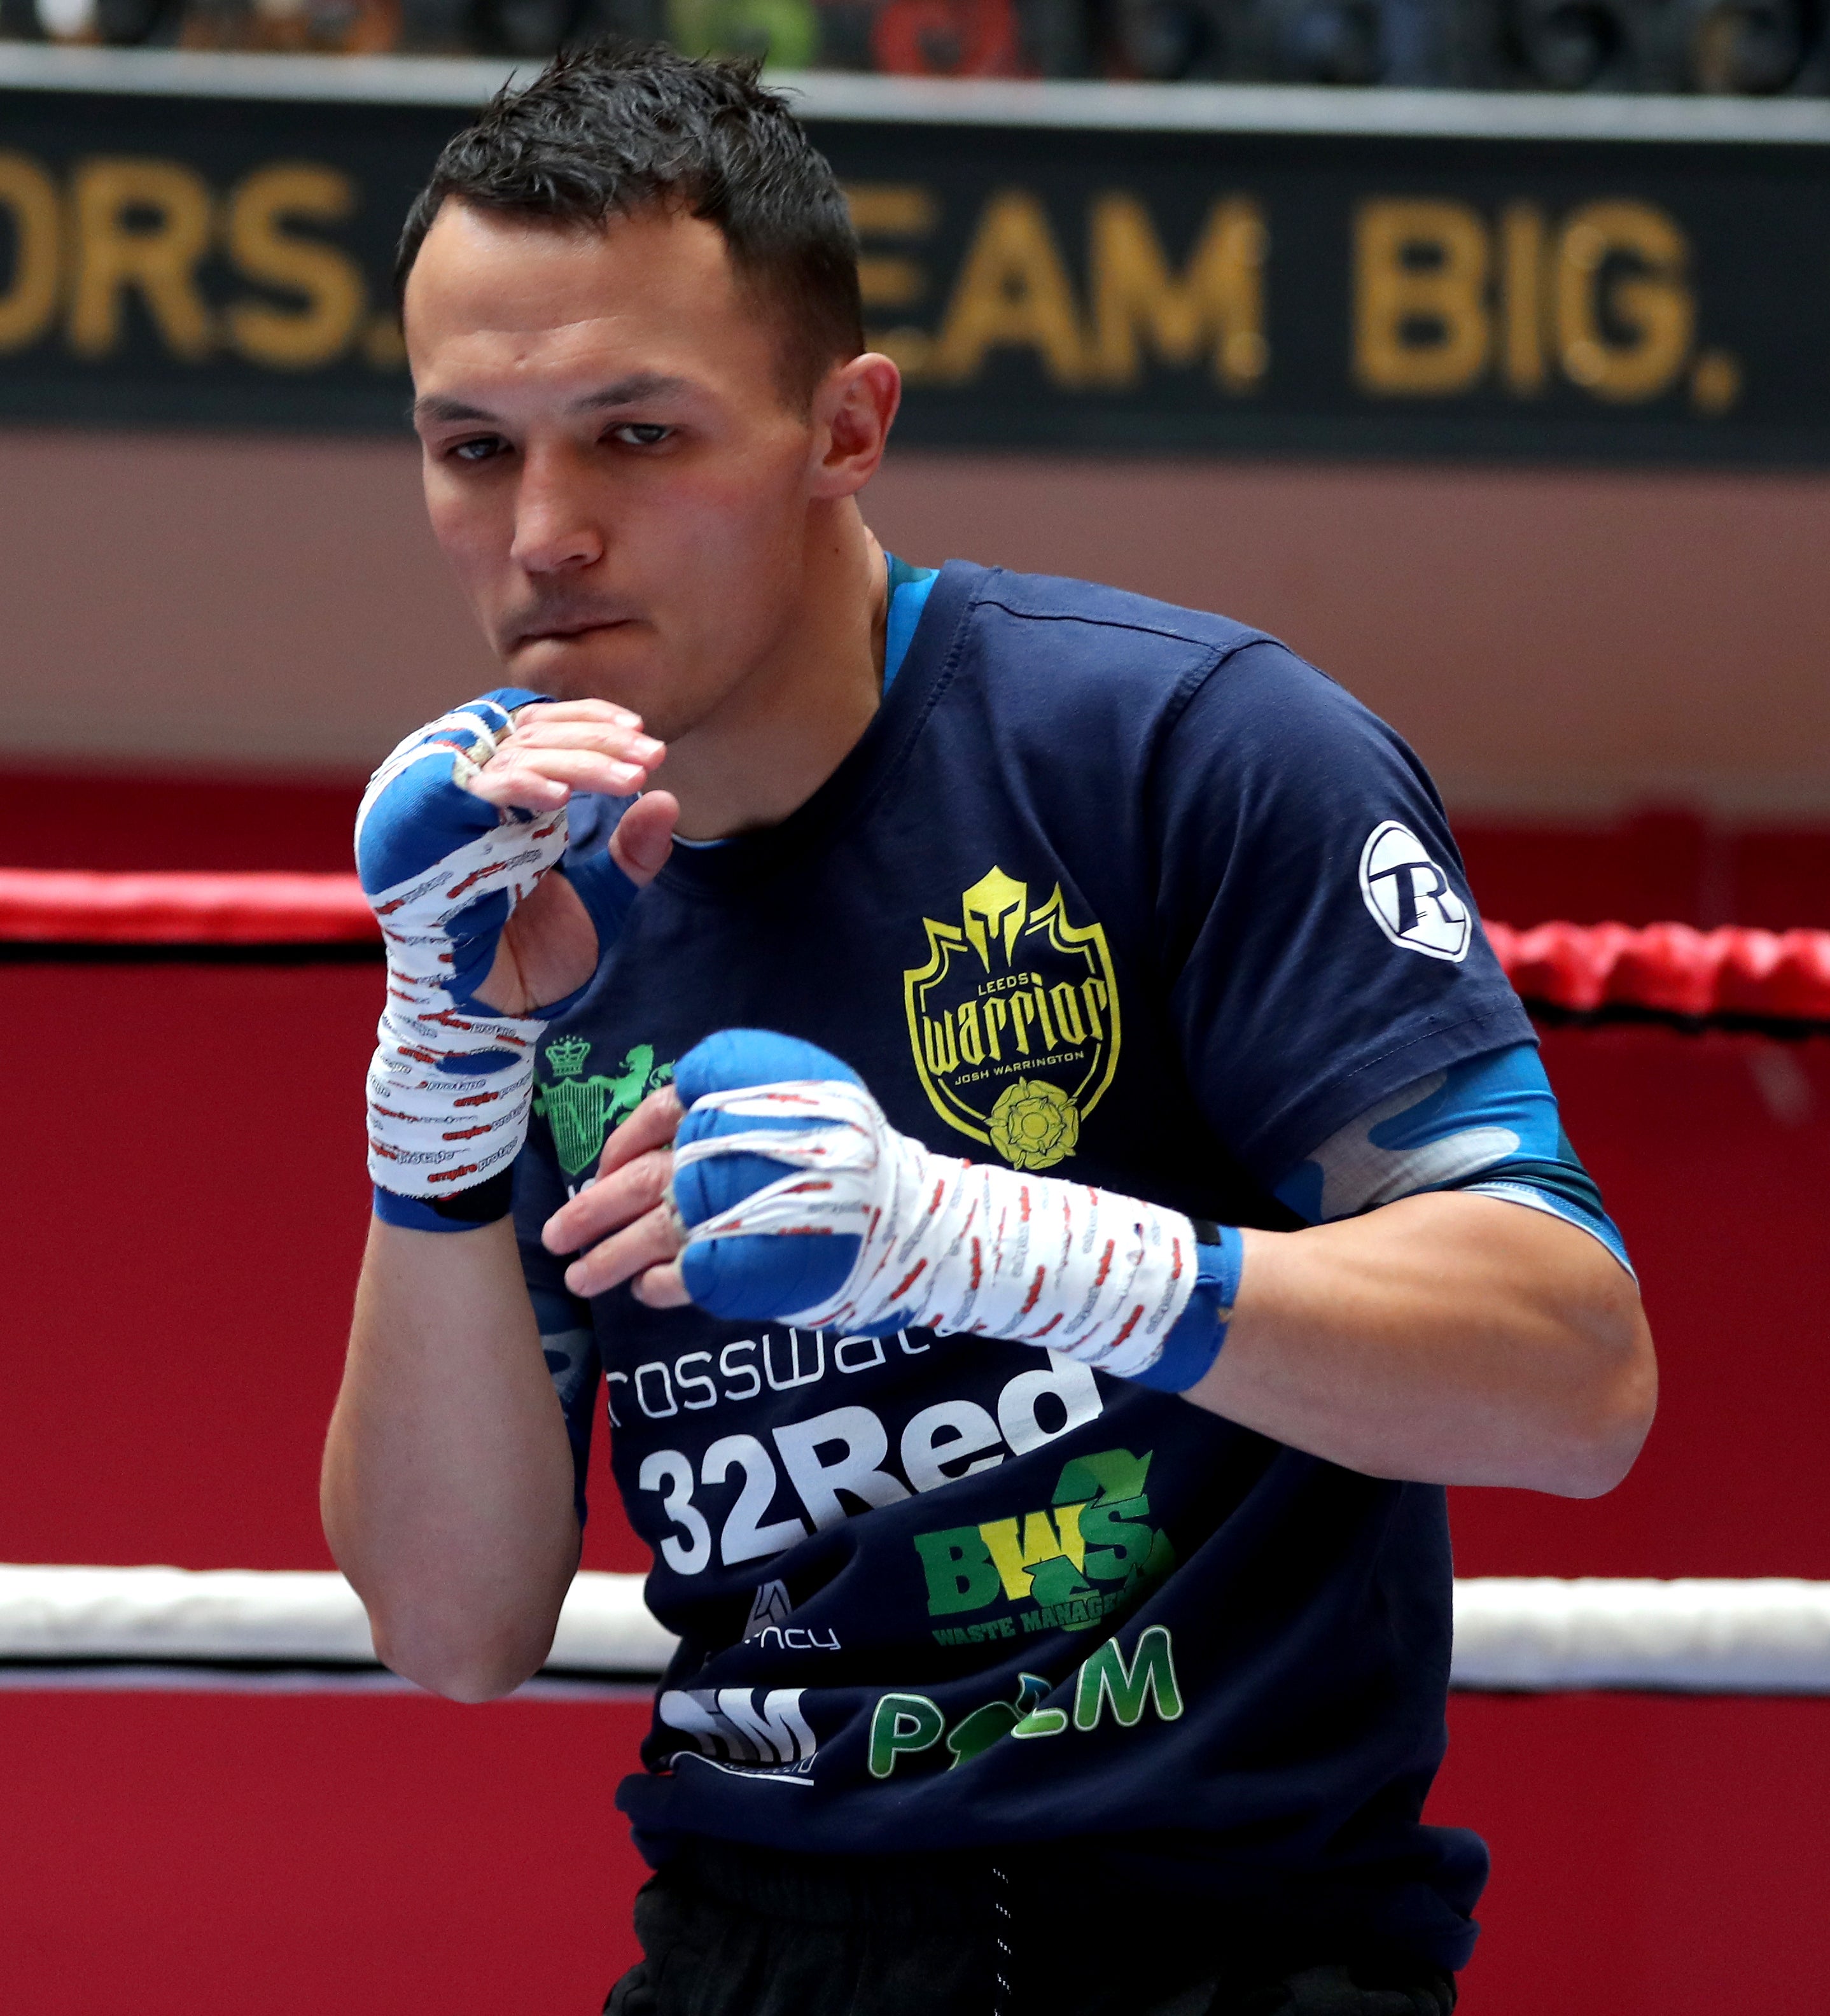 Josh Warrington will look to win back the IFB Featherweight title in September.